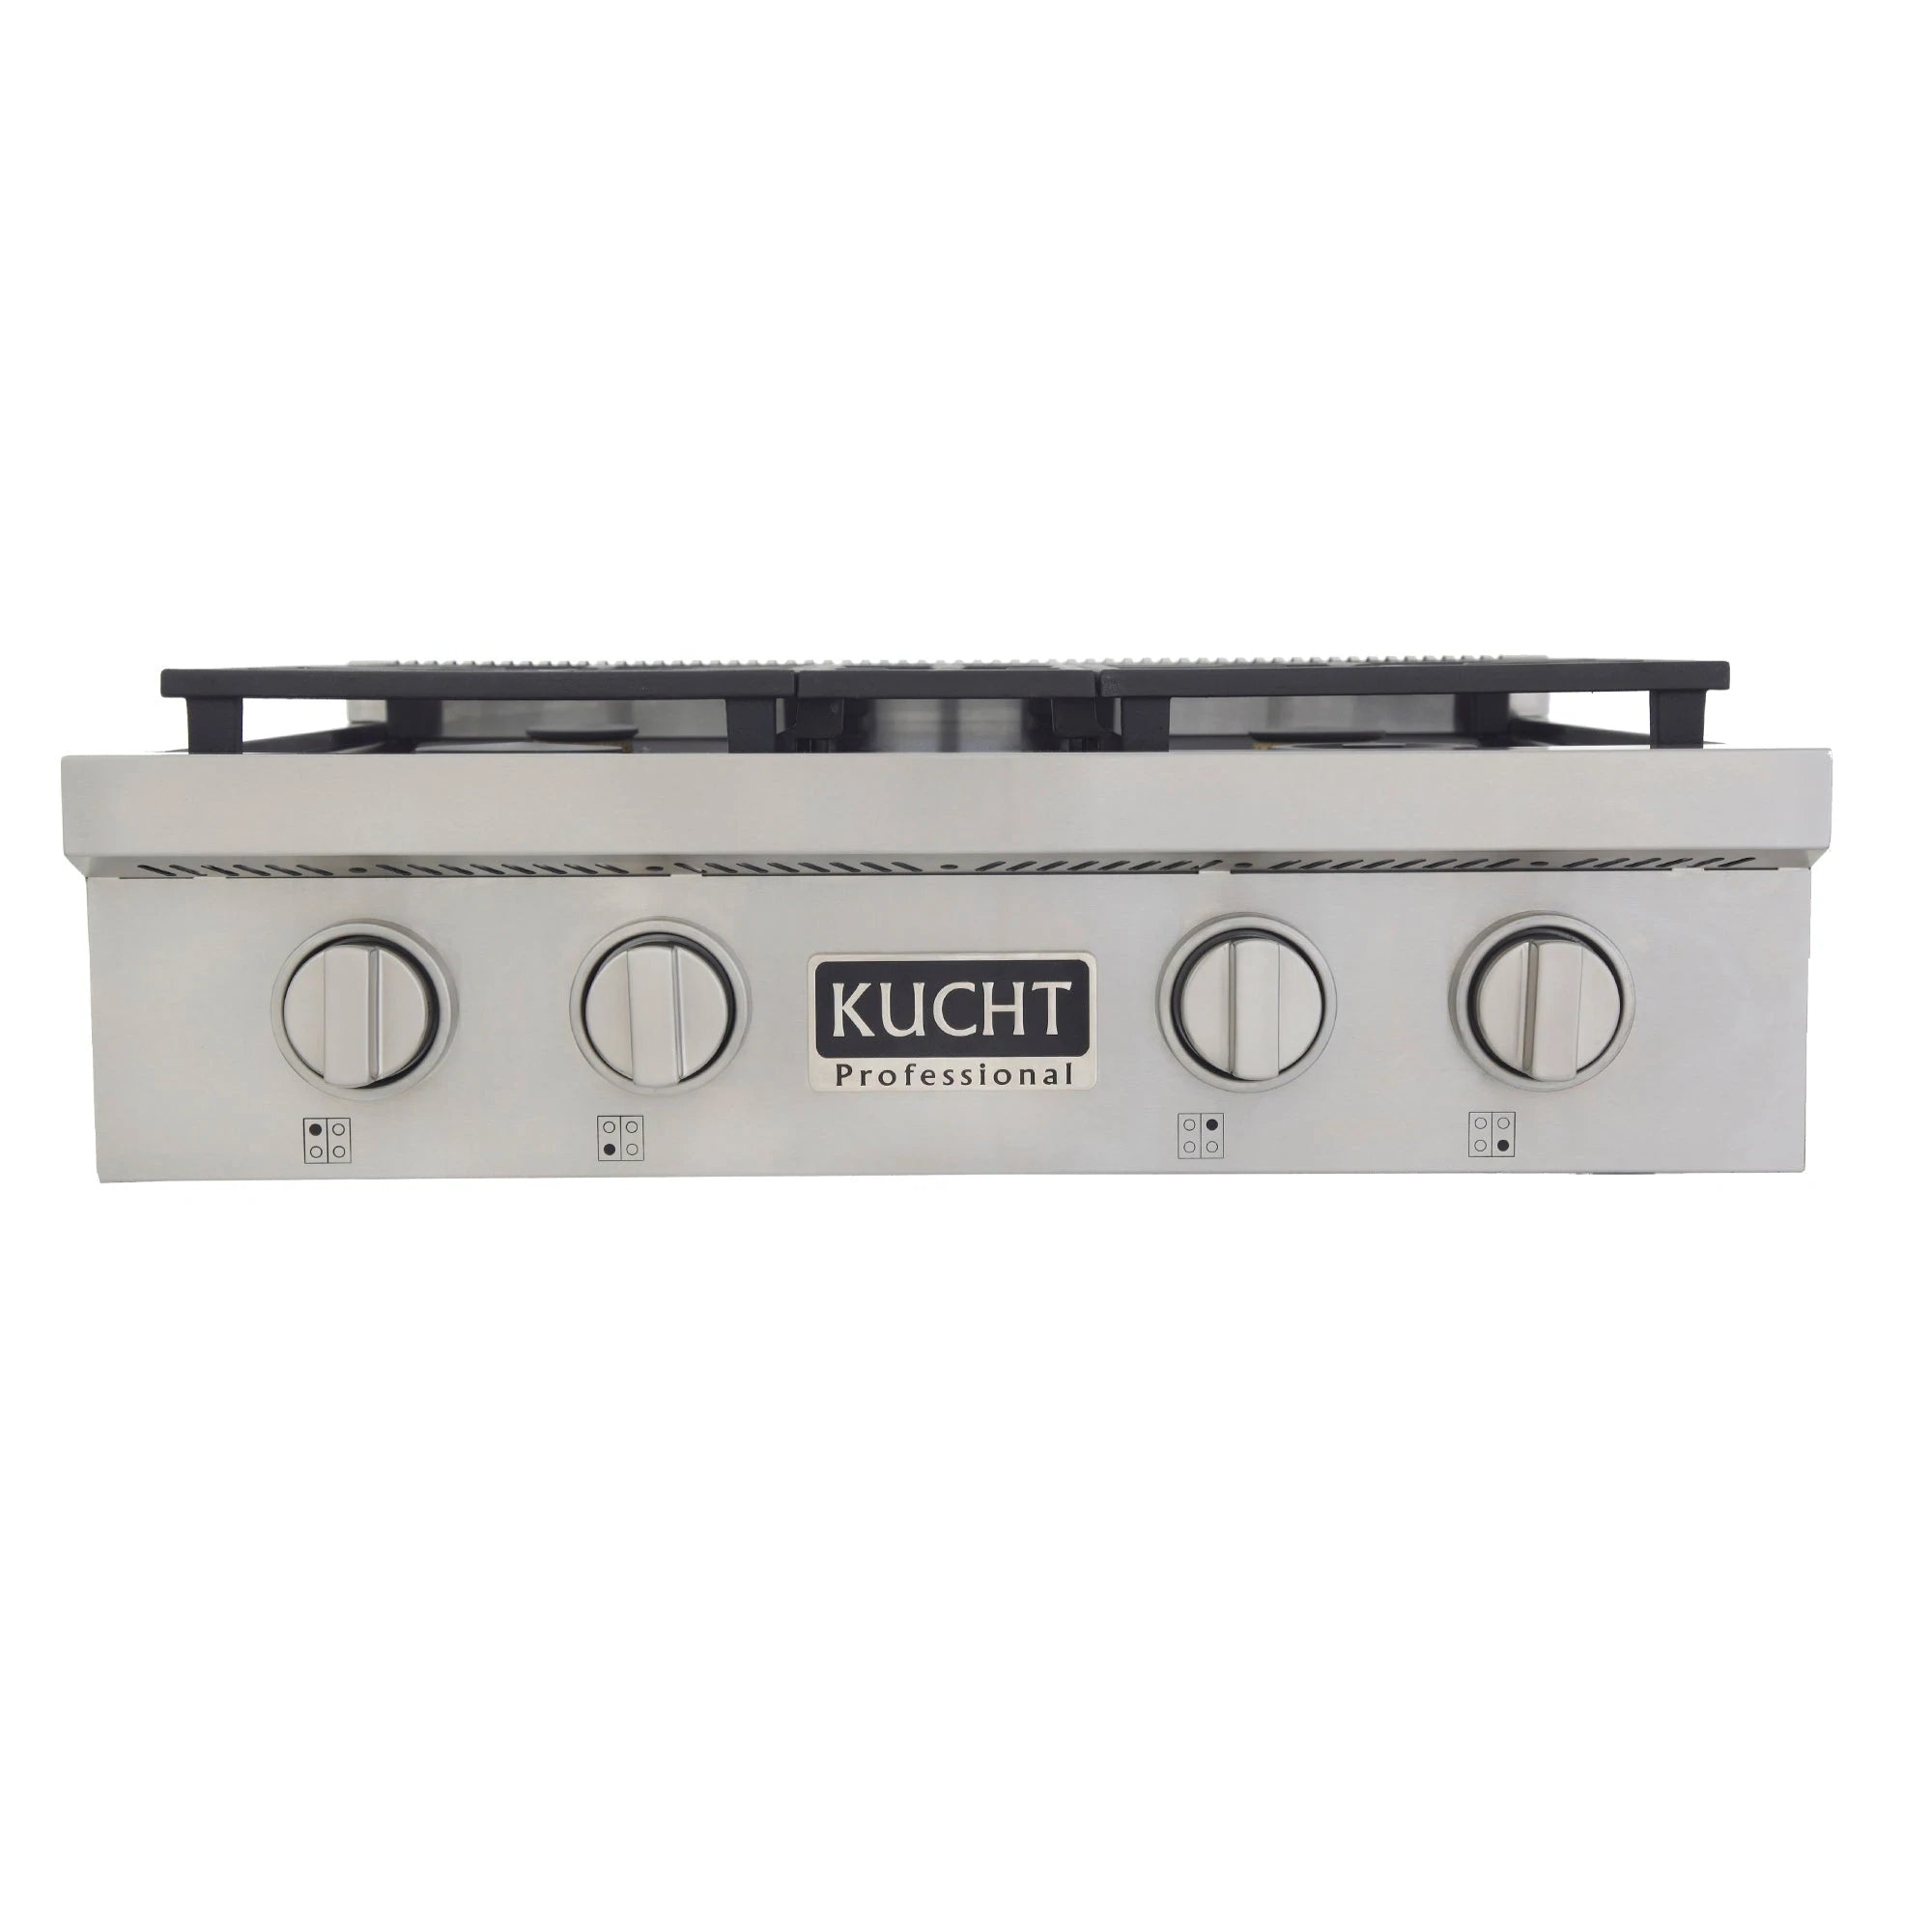 Kucht K7740D Professional 18 Front Control Dishwasher, Stainless Steel